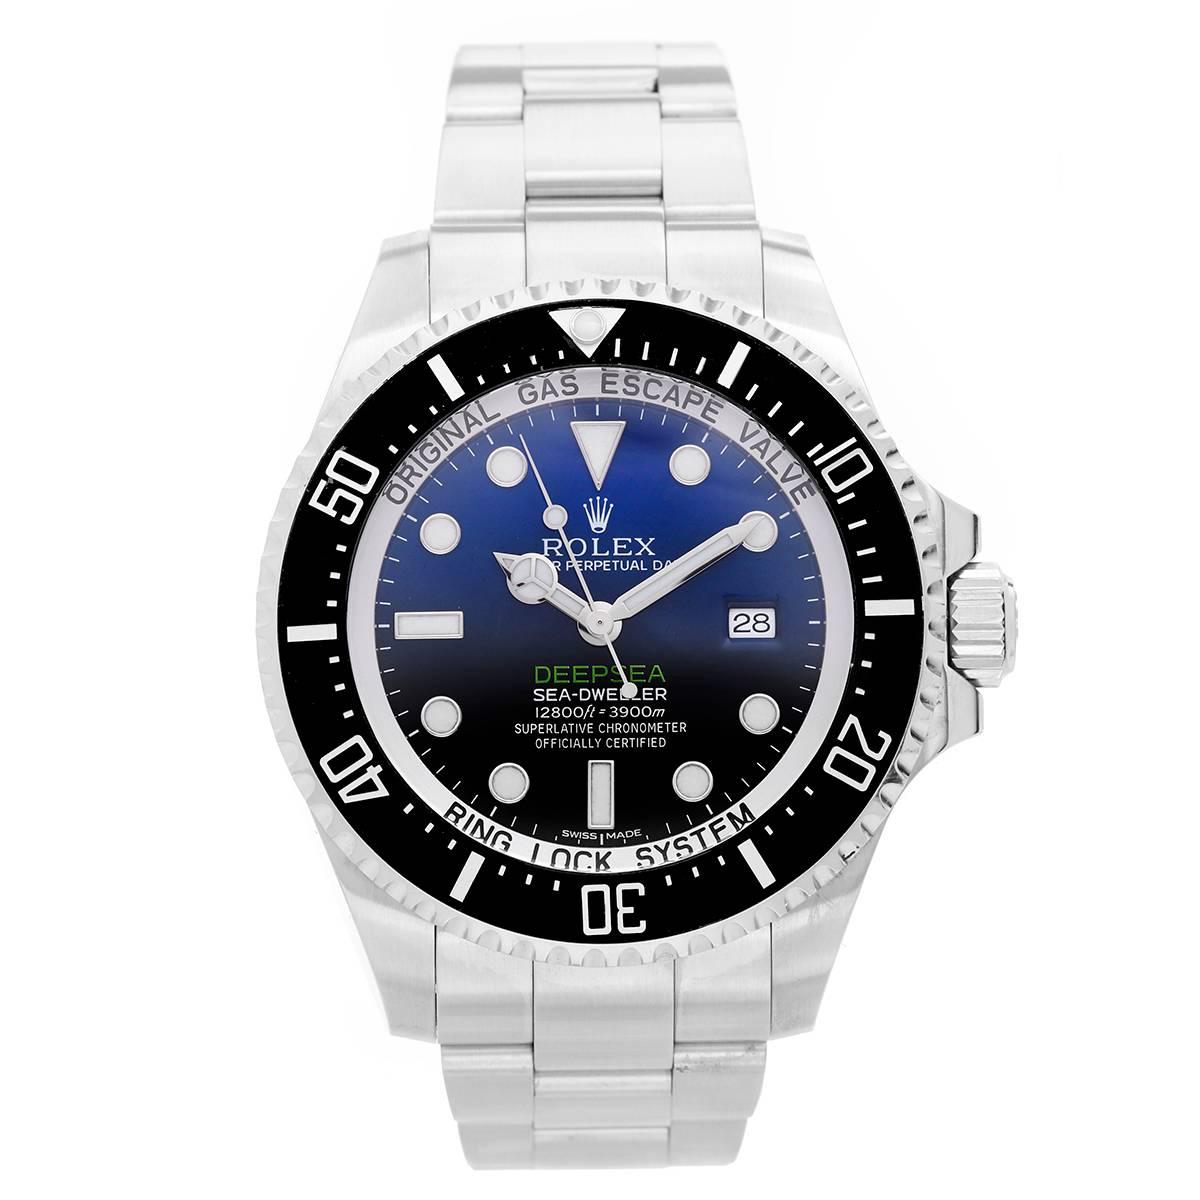 Rolex Sea Dweller-Deepsea Blue 116660 -  Automatic. Stainless Steel ( 44mm ). Gradient deep blue with unidirectional rotating ceramic bezel. Oyster bracelet with glide lock and adjustable clasp. Pre-owned with box and papers.